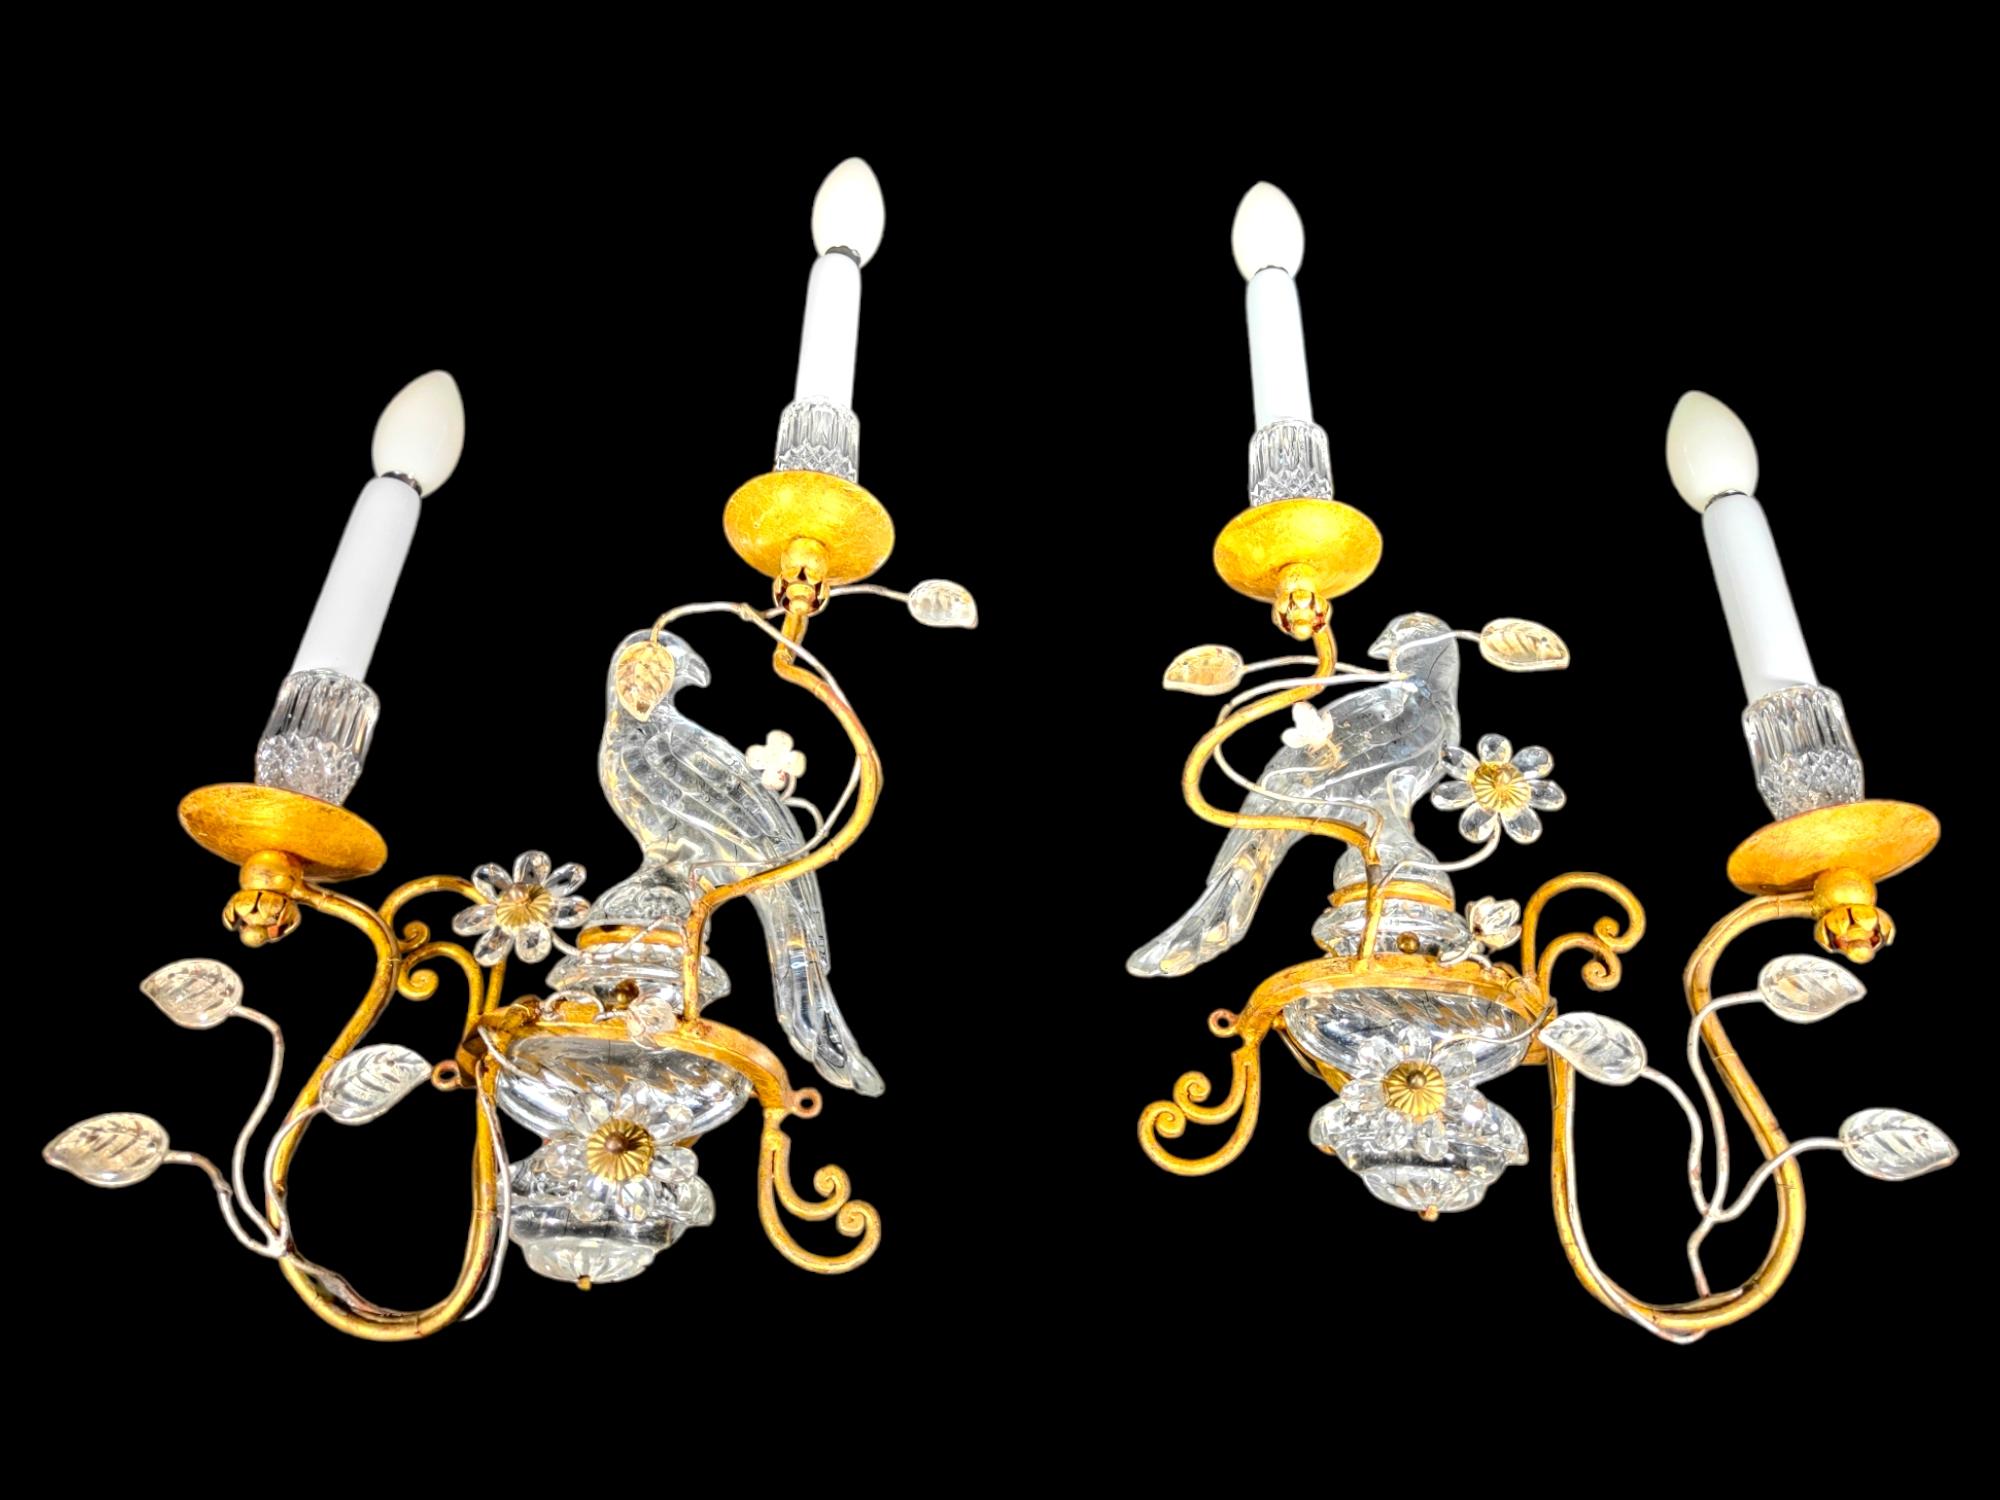 Authentic French Art Deco Maison rings crystal opposite face parrot appliques
Authentic French Art Deco Maison Bagues cristal opposite face parrot sconces A pair of authentic French Art Deco style crystal and leaf wall sconces circa 1950. The